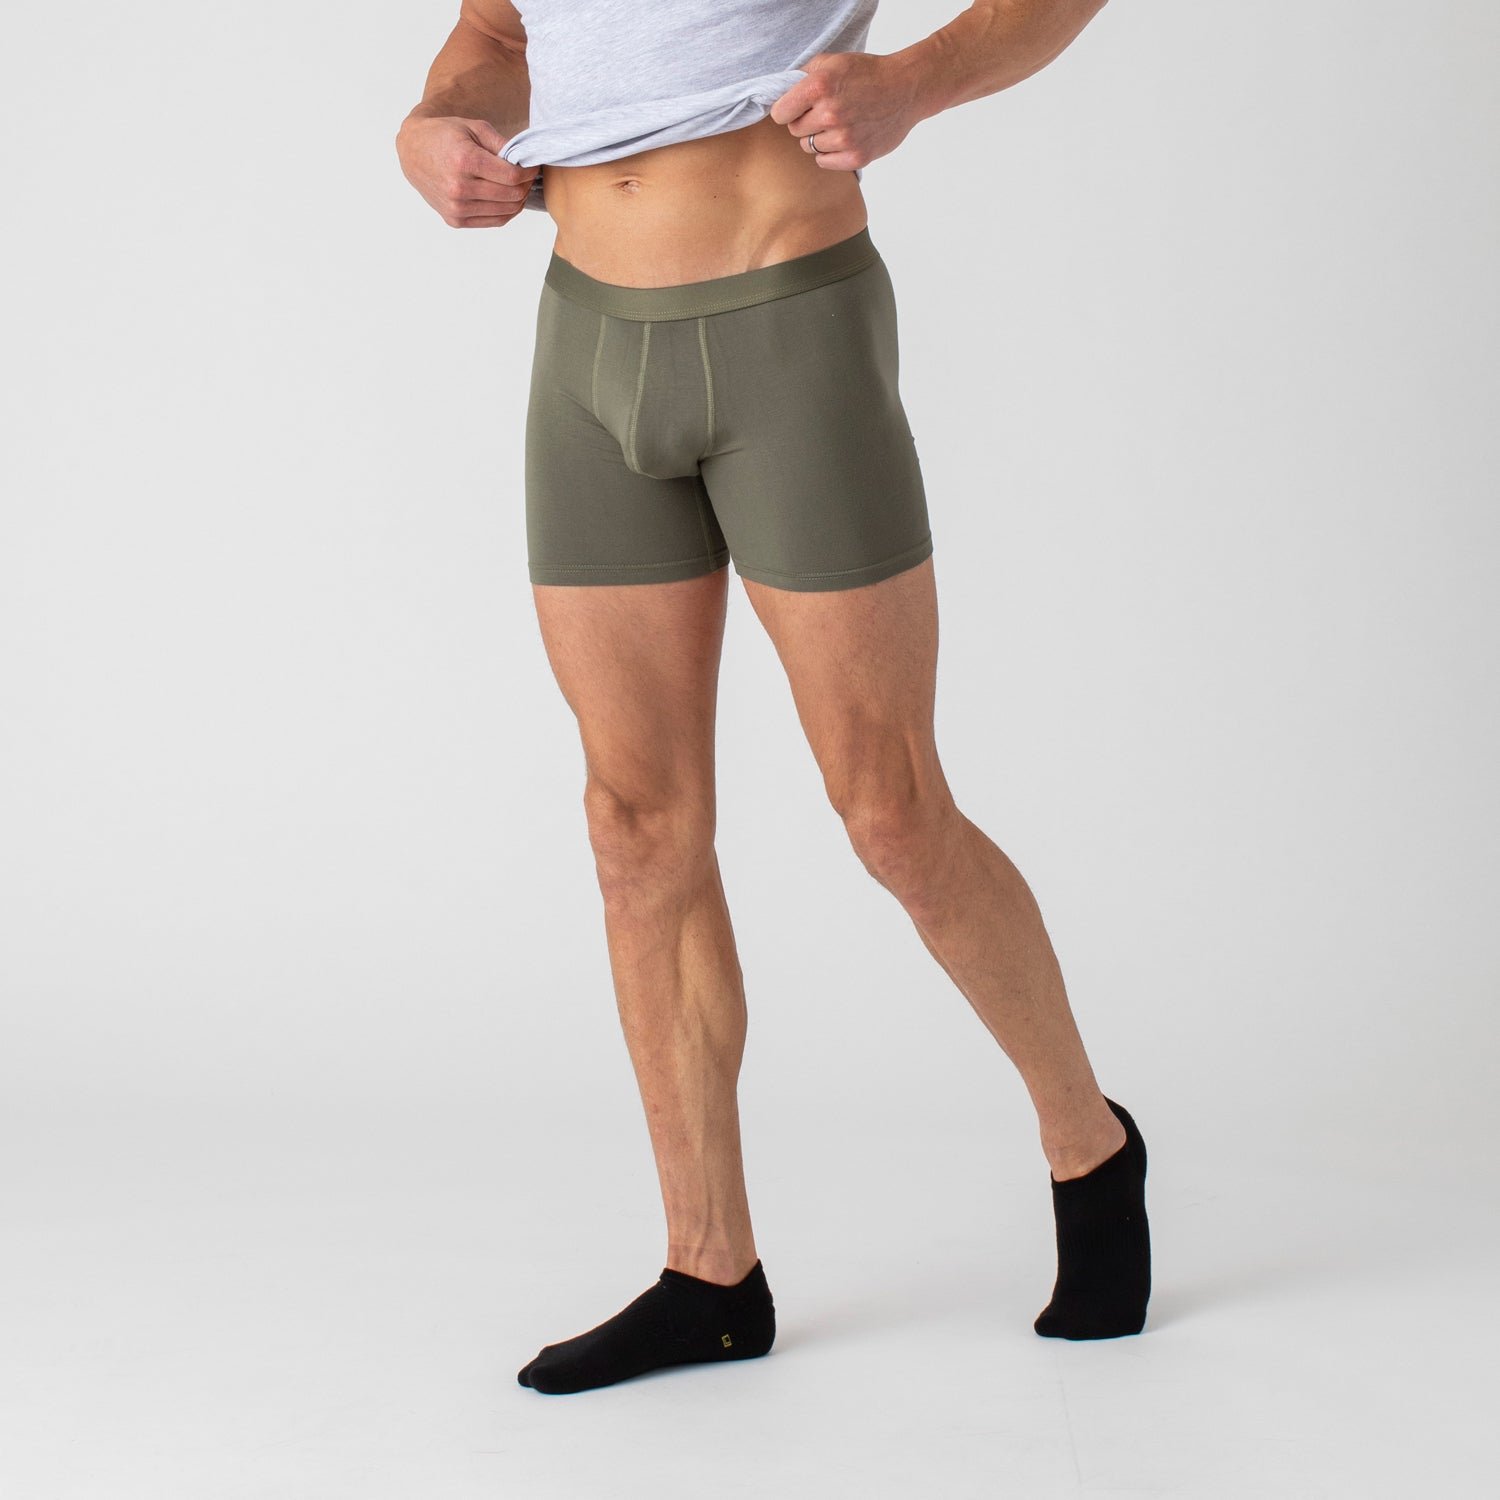 Military Green Boxer Brief